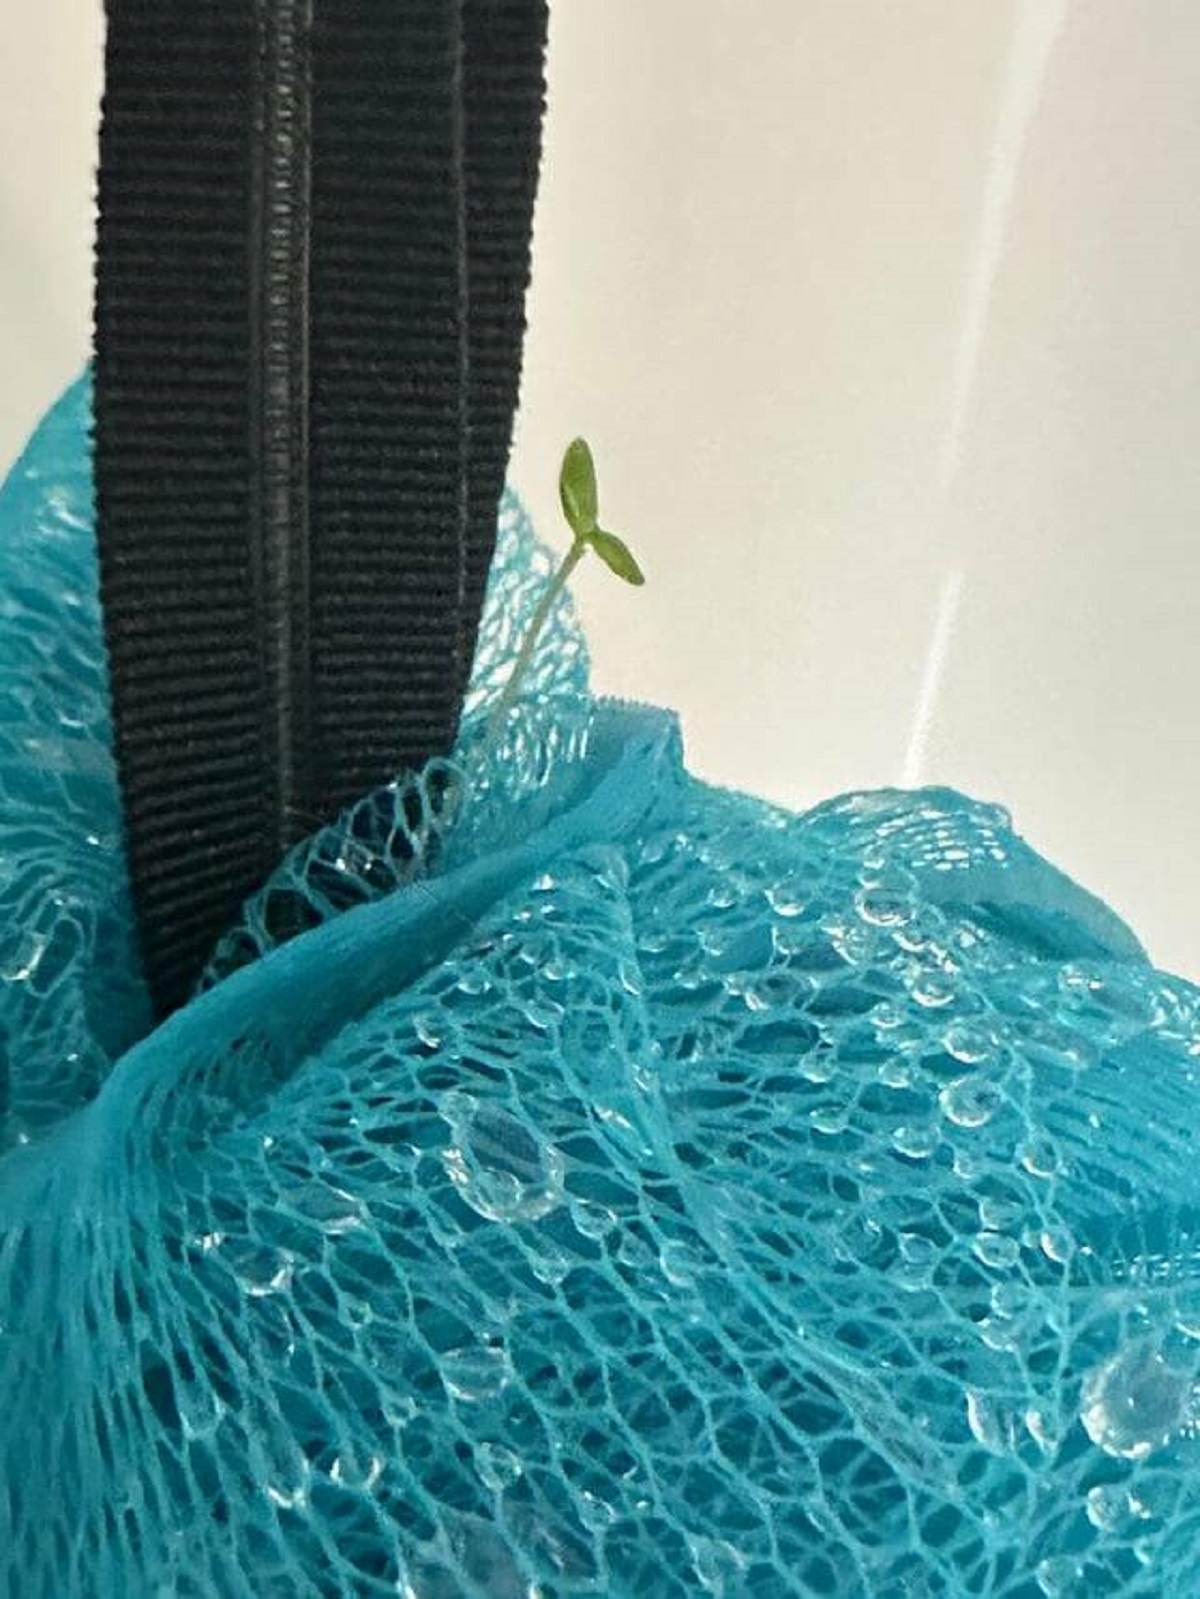 "A plant sprouted out of my loofah."